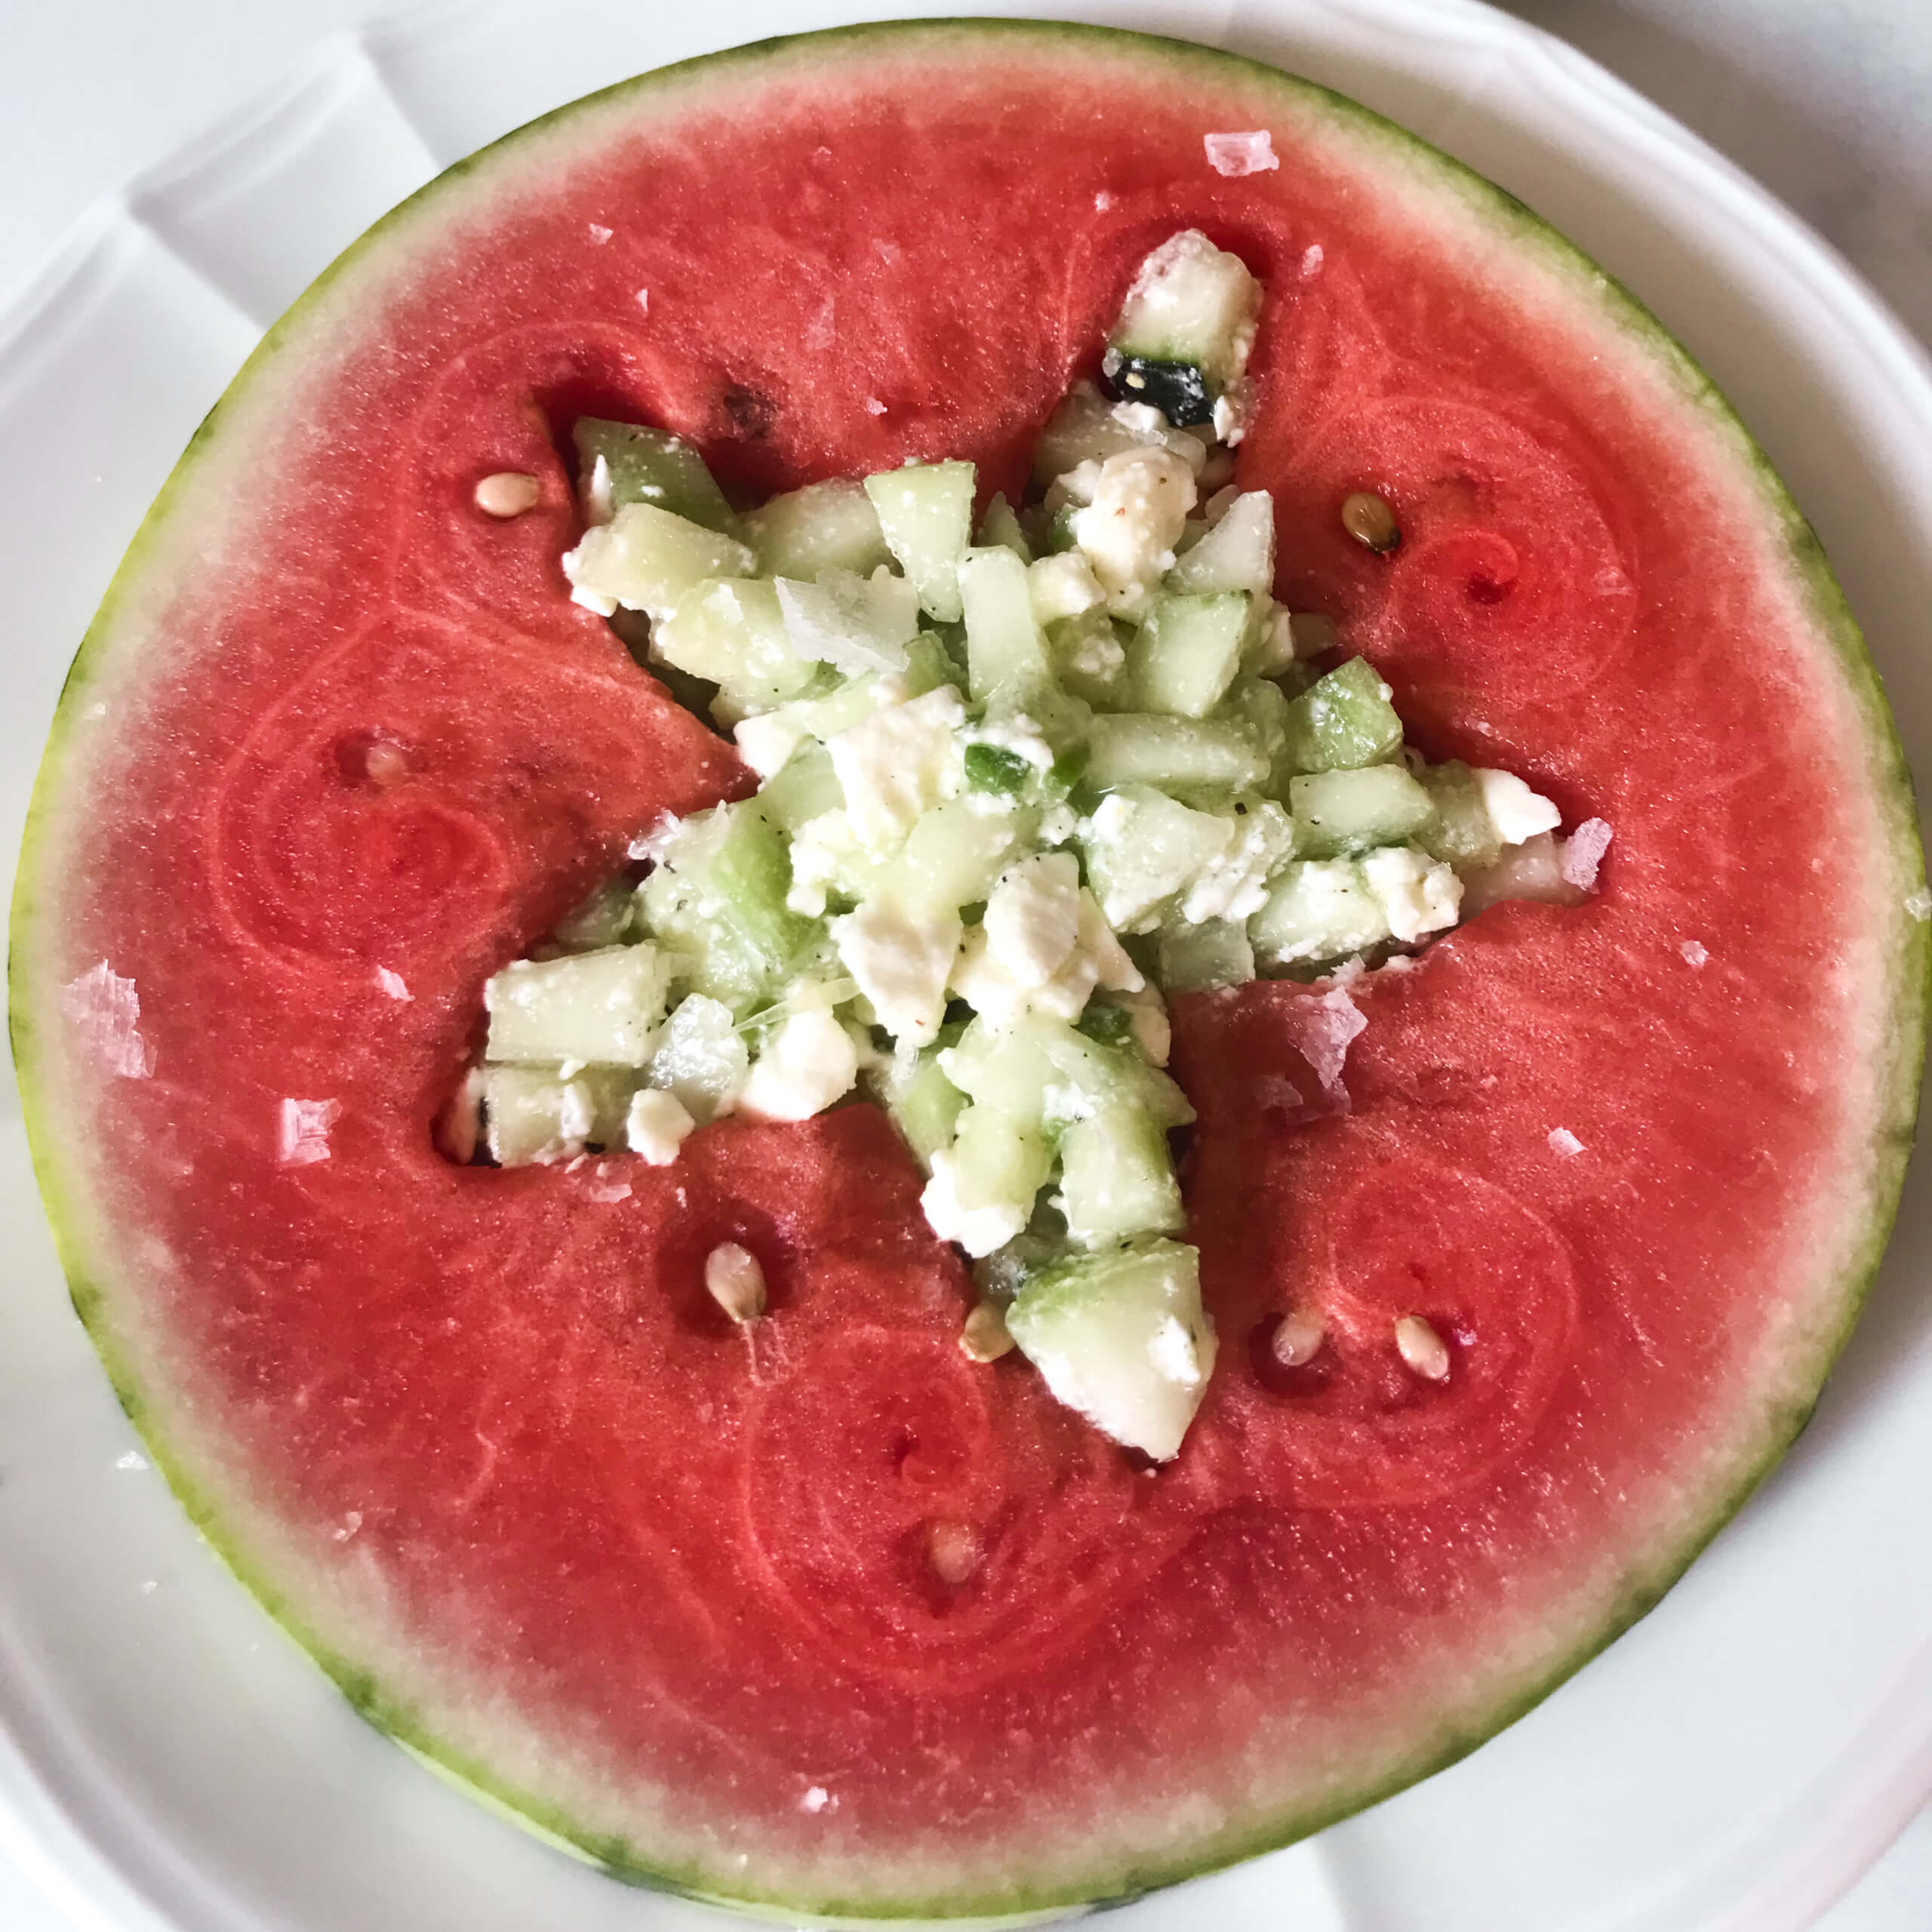 Watermelon Cutouts With Cucumber & Feta Salad | My Curated Tastes